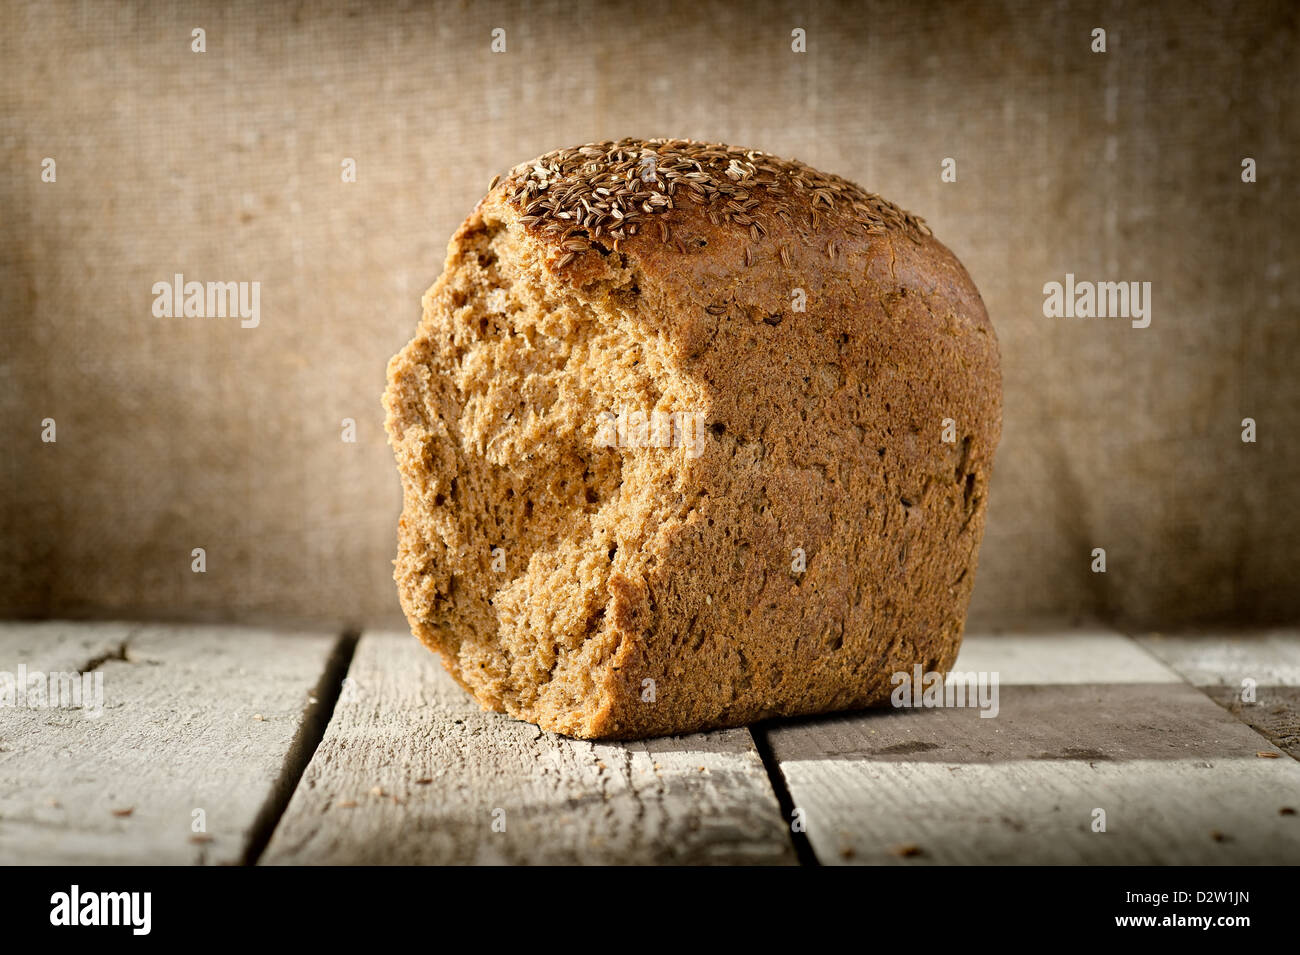 Loaf of rye bread on a wooden table Stock Photo